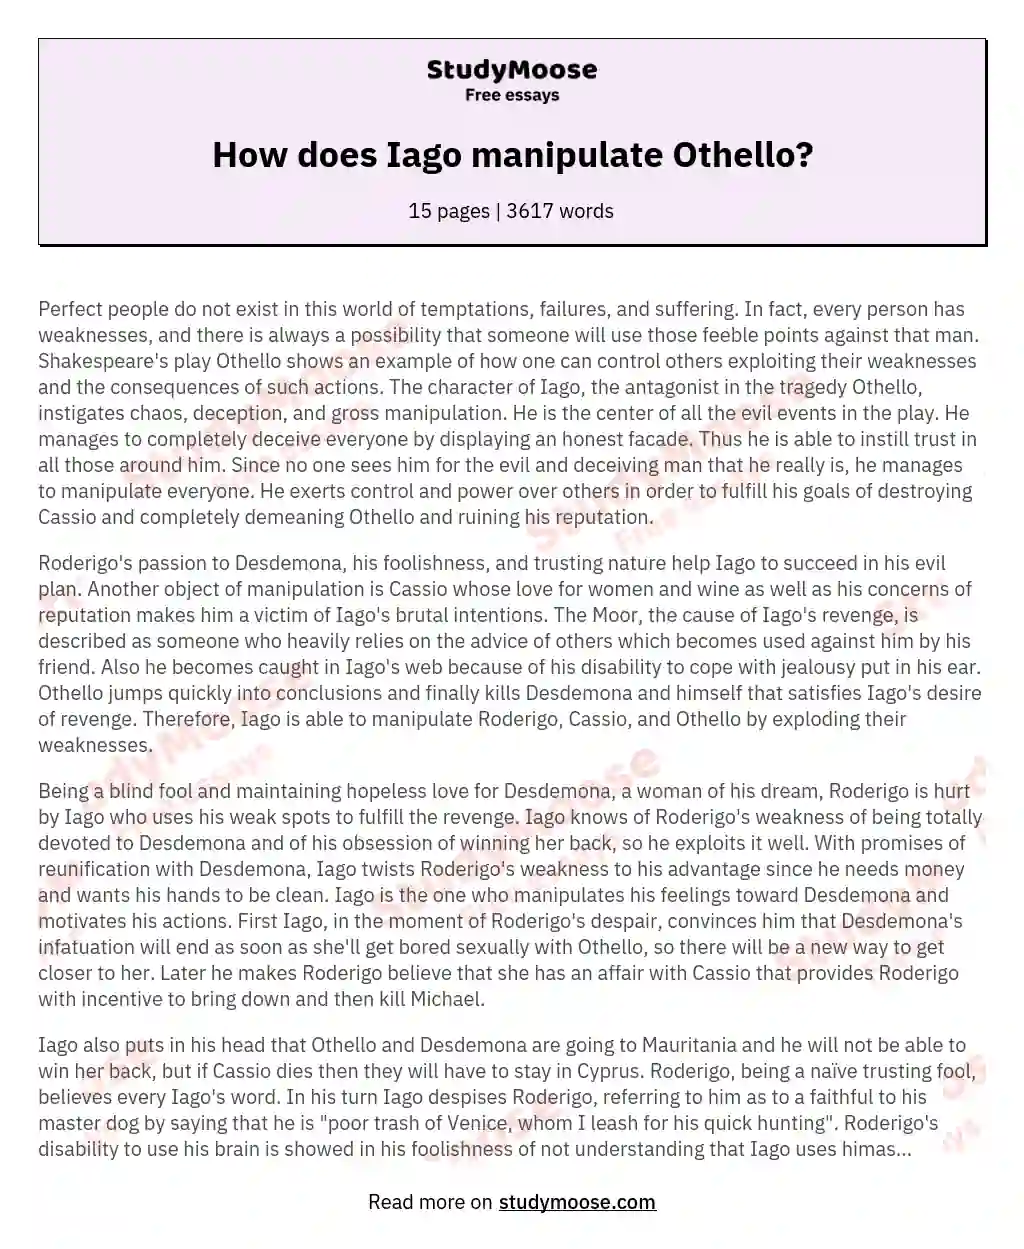 How does Iago manipulate Othello? essay